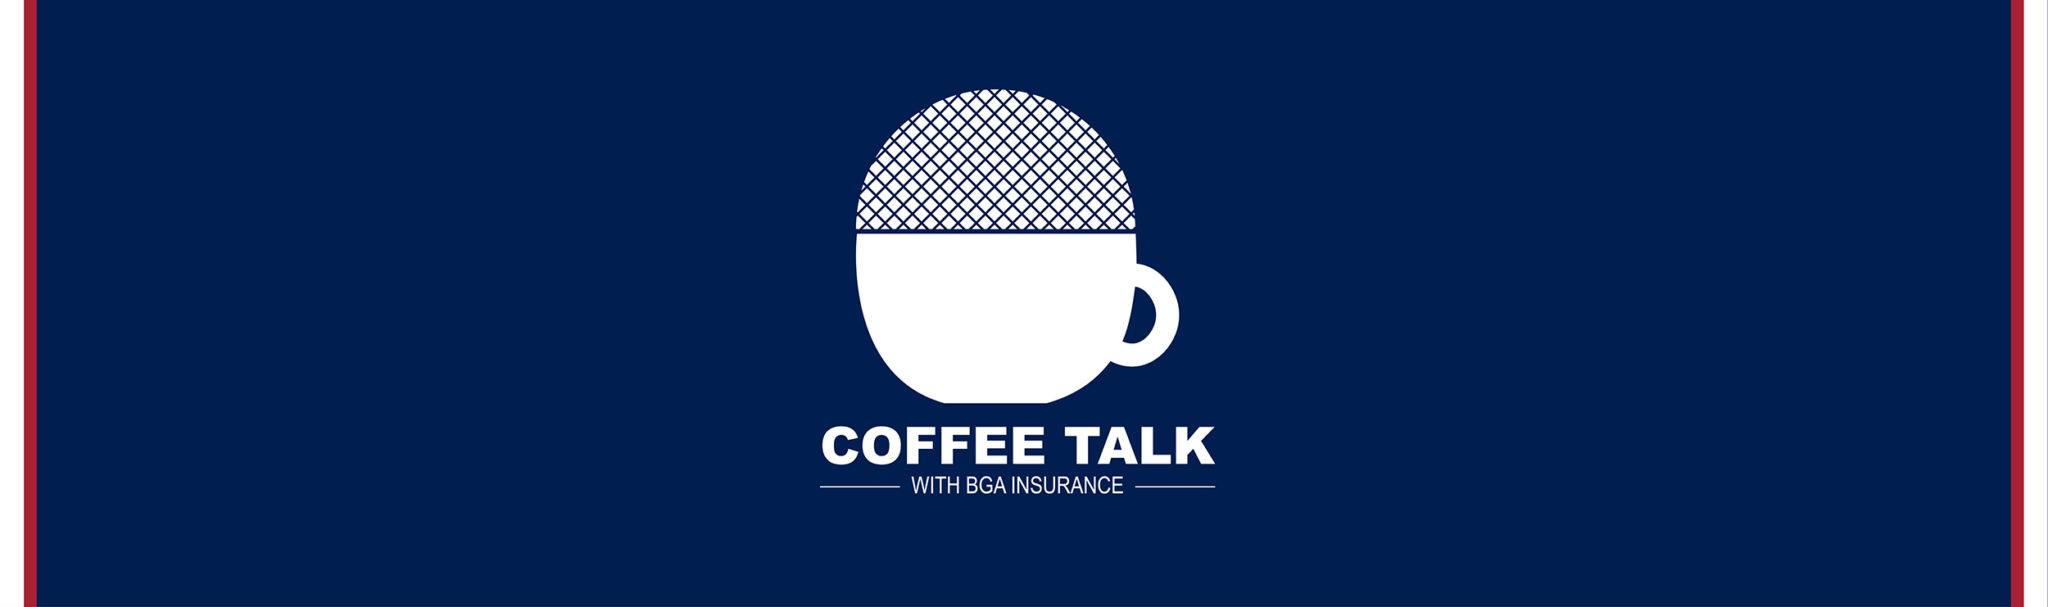 Coffee Talk with BGA Insurance Season 2 Episode 1 // Discover the Future of Insurance: AI Cancer Detection